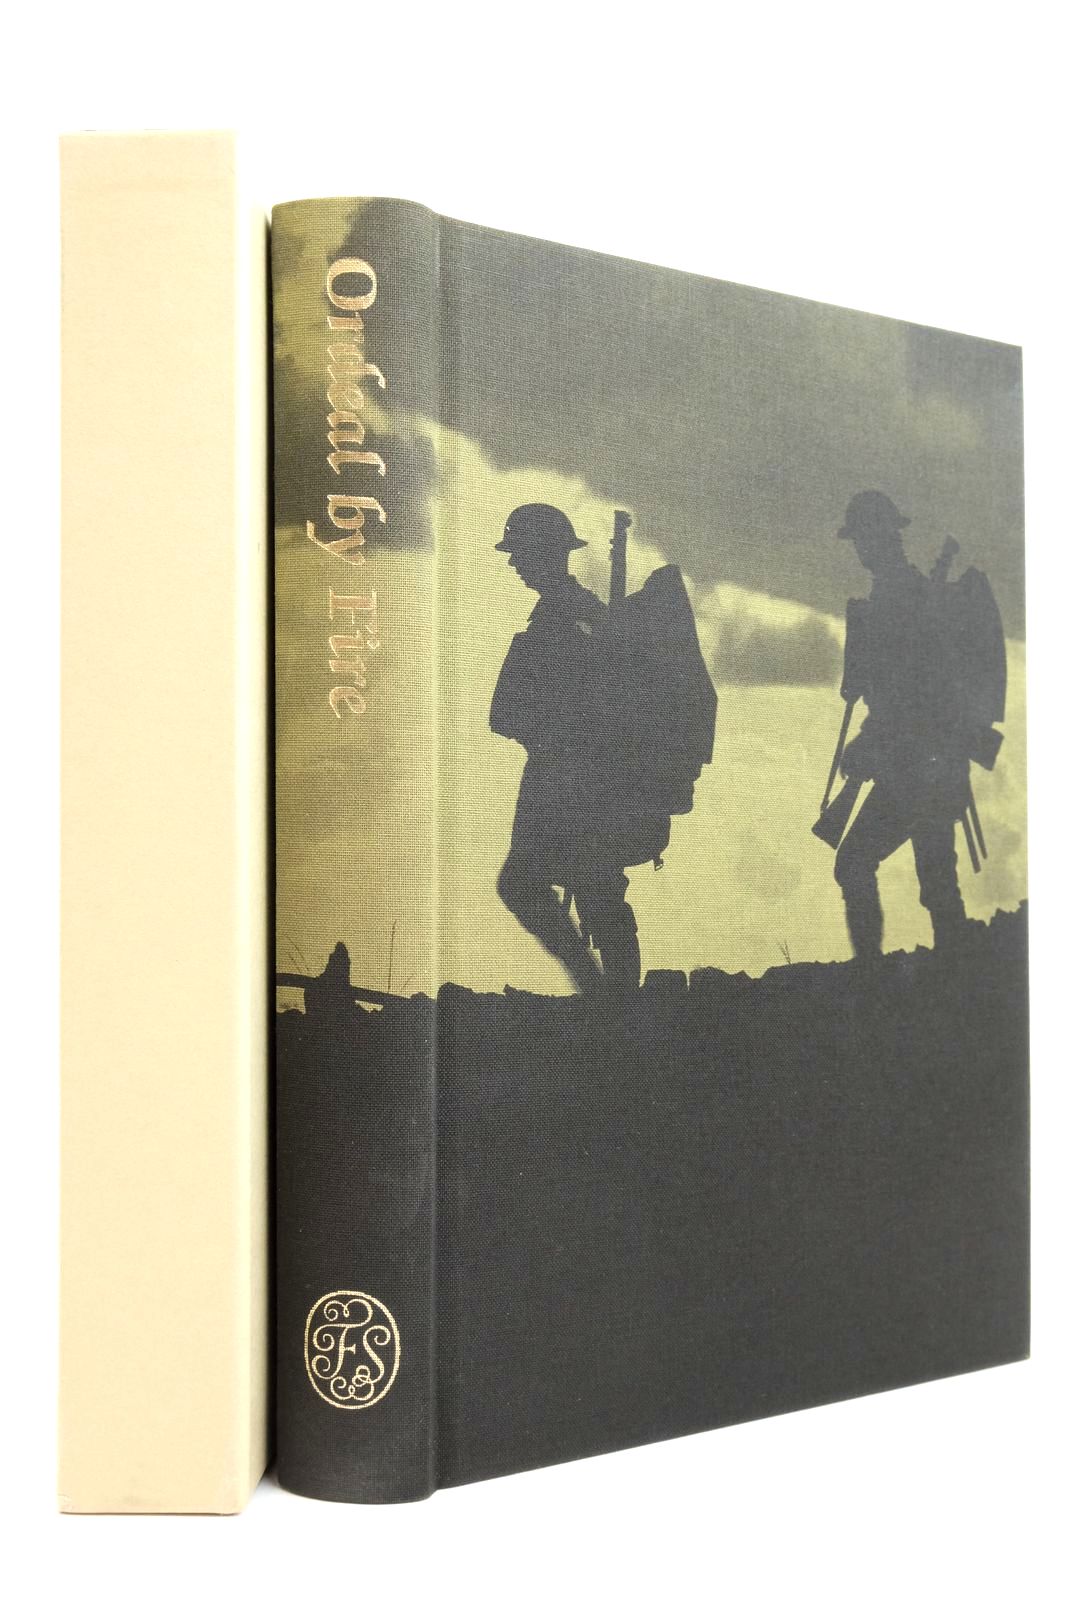 Photo of ORDEAL BY FIRE written by MacDonald, Lyn published by Folio Society (STOCK CODE: 2136544)  for sale by Stella & Rose's Books